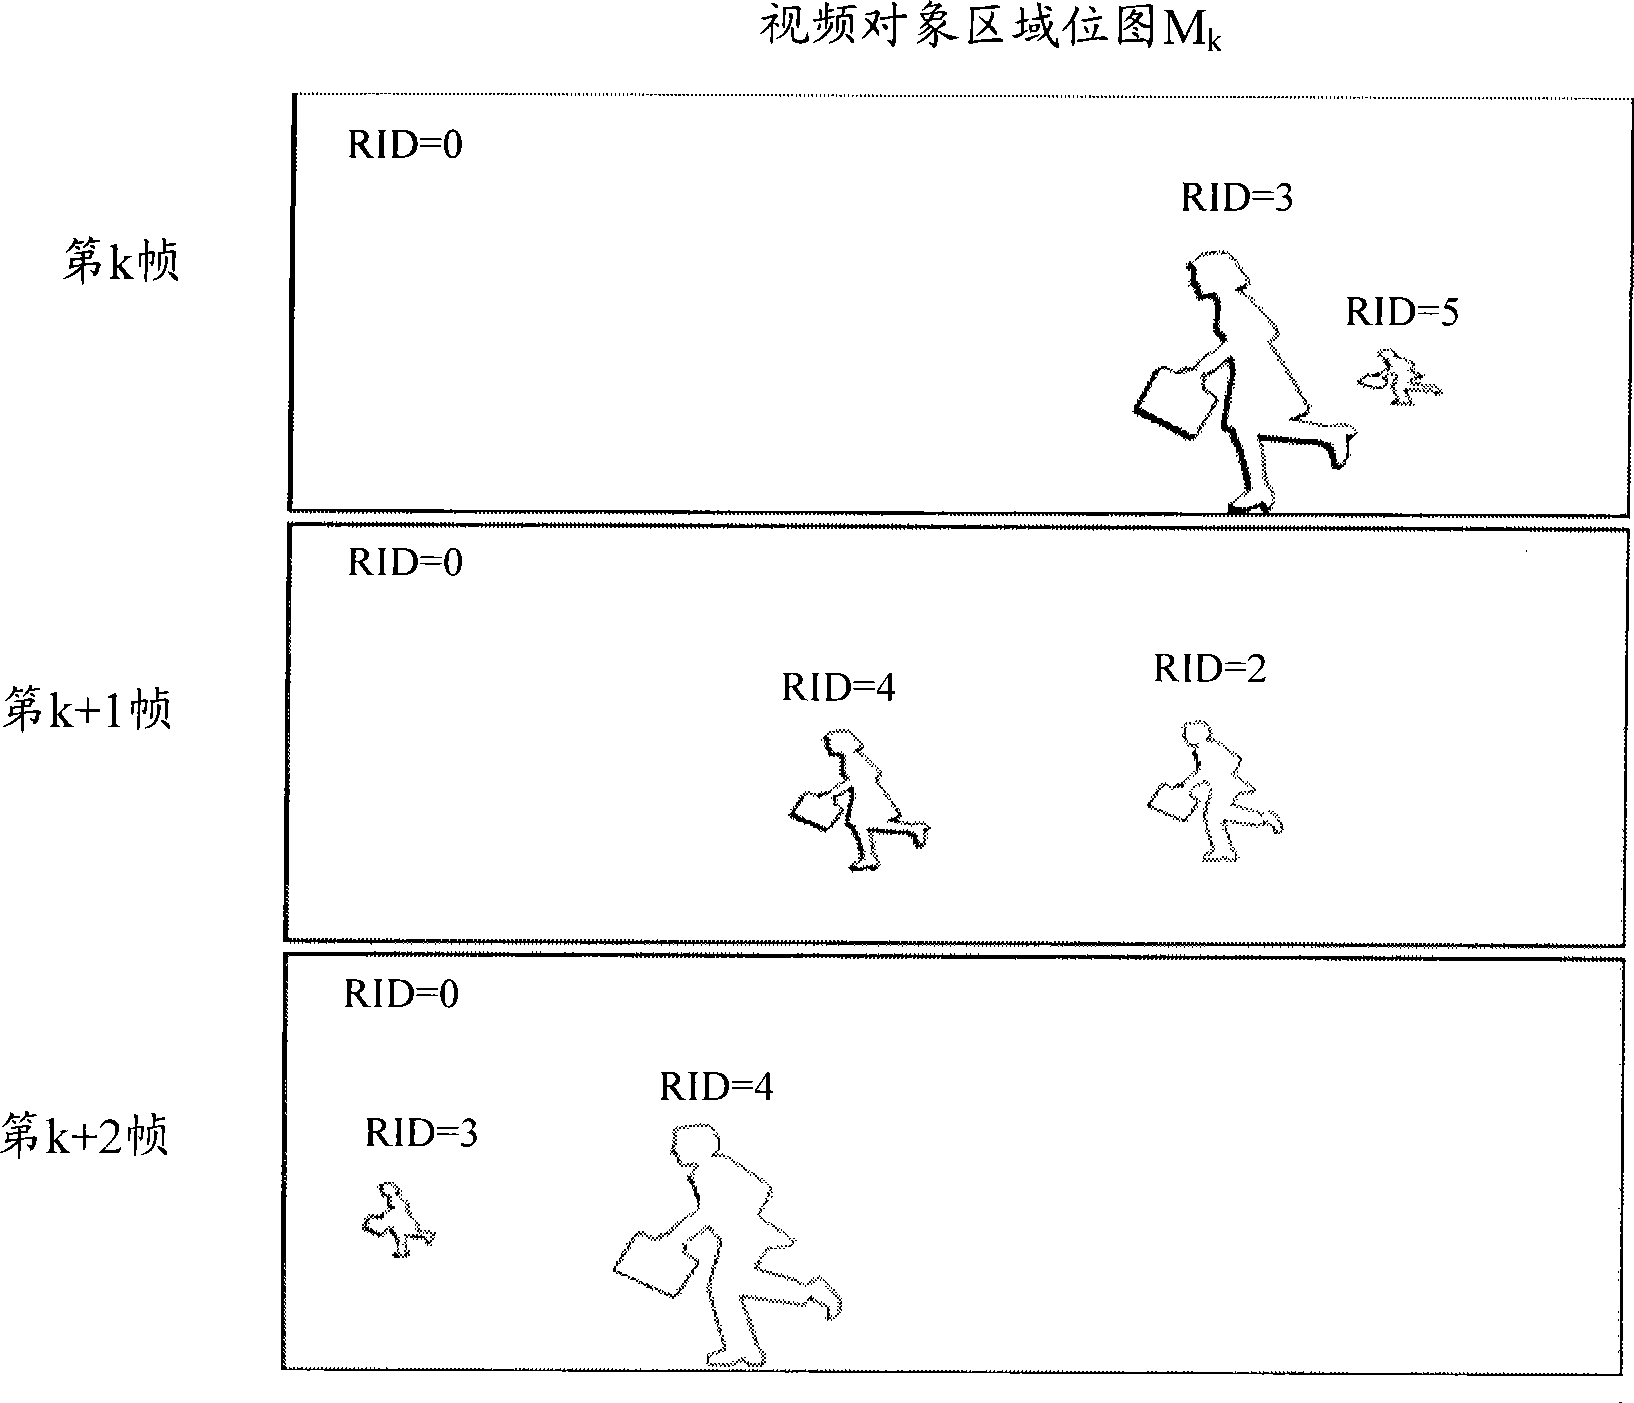 Method and equipment for describing and capturing video object